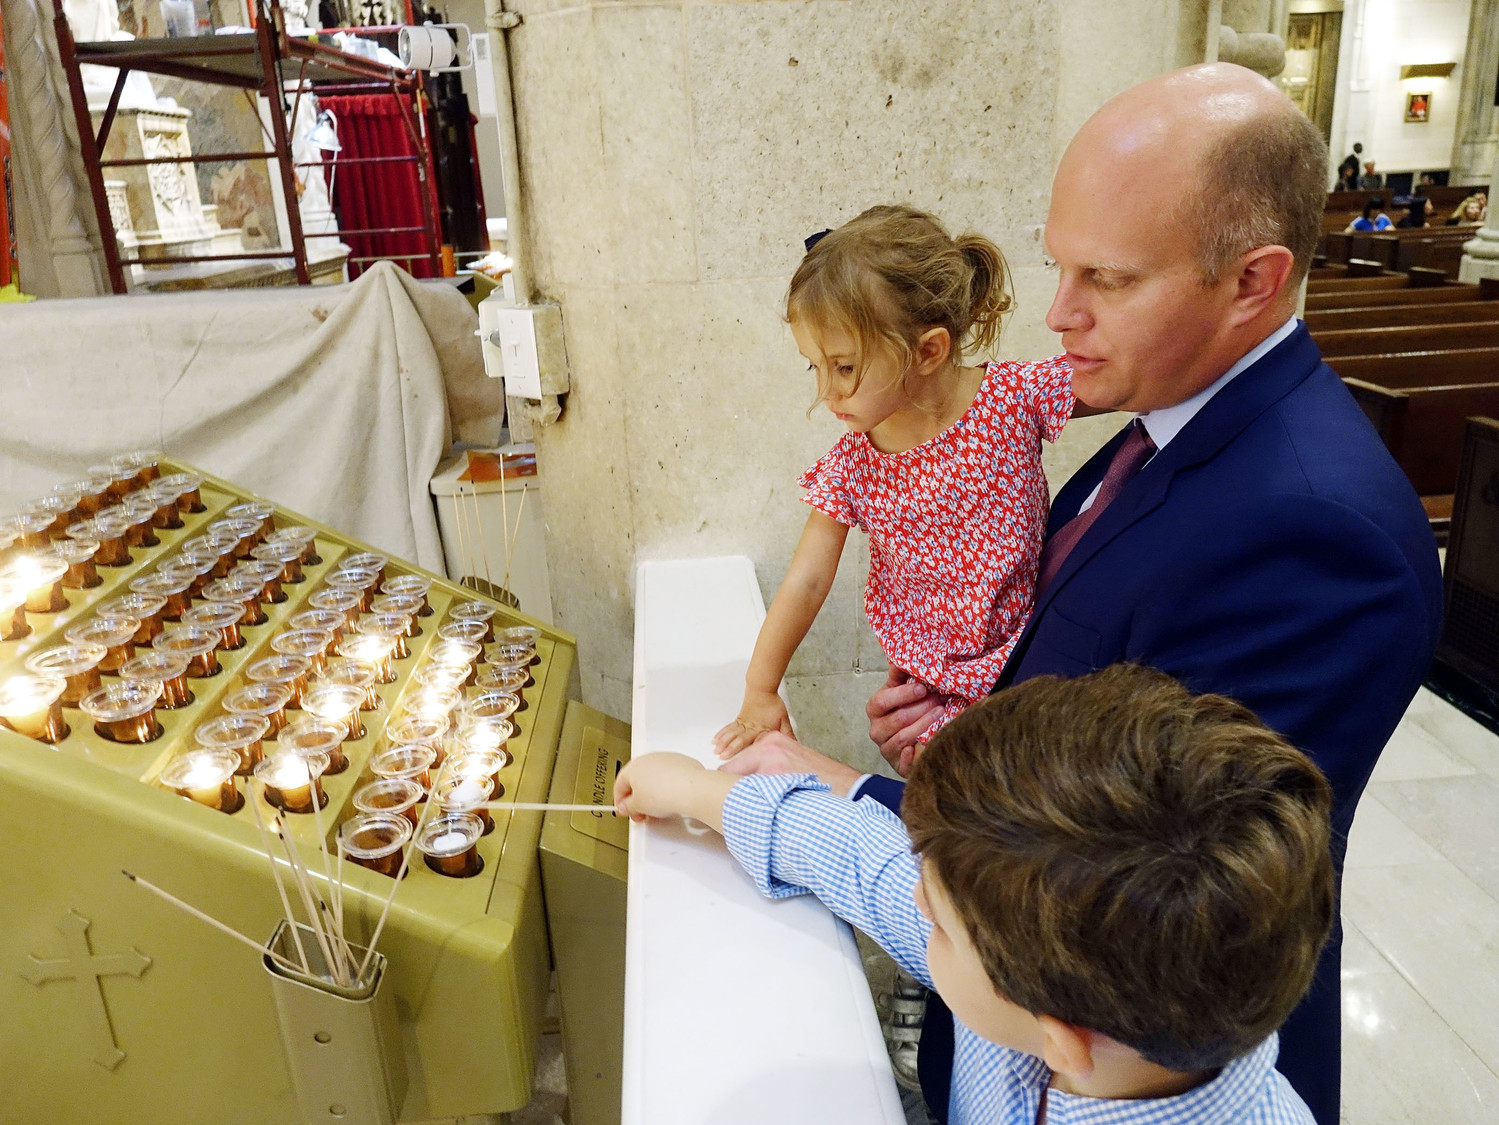 A curious Lillie Seton Lamb, 3, a descendent of Mother Seton, watches as her brother George lights a candle at the altar under the guidance of their father, Seamus Lamb.